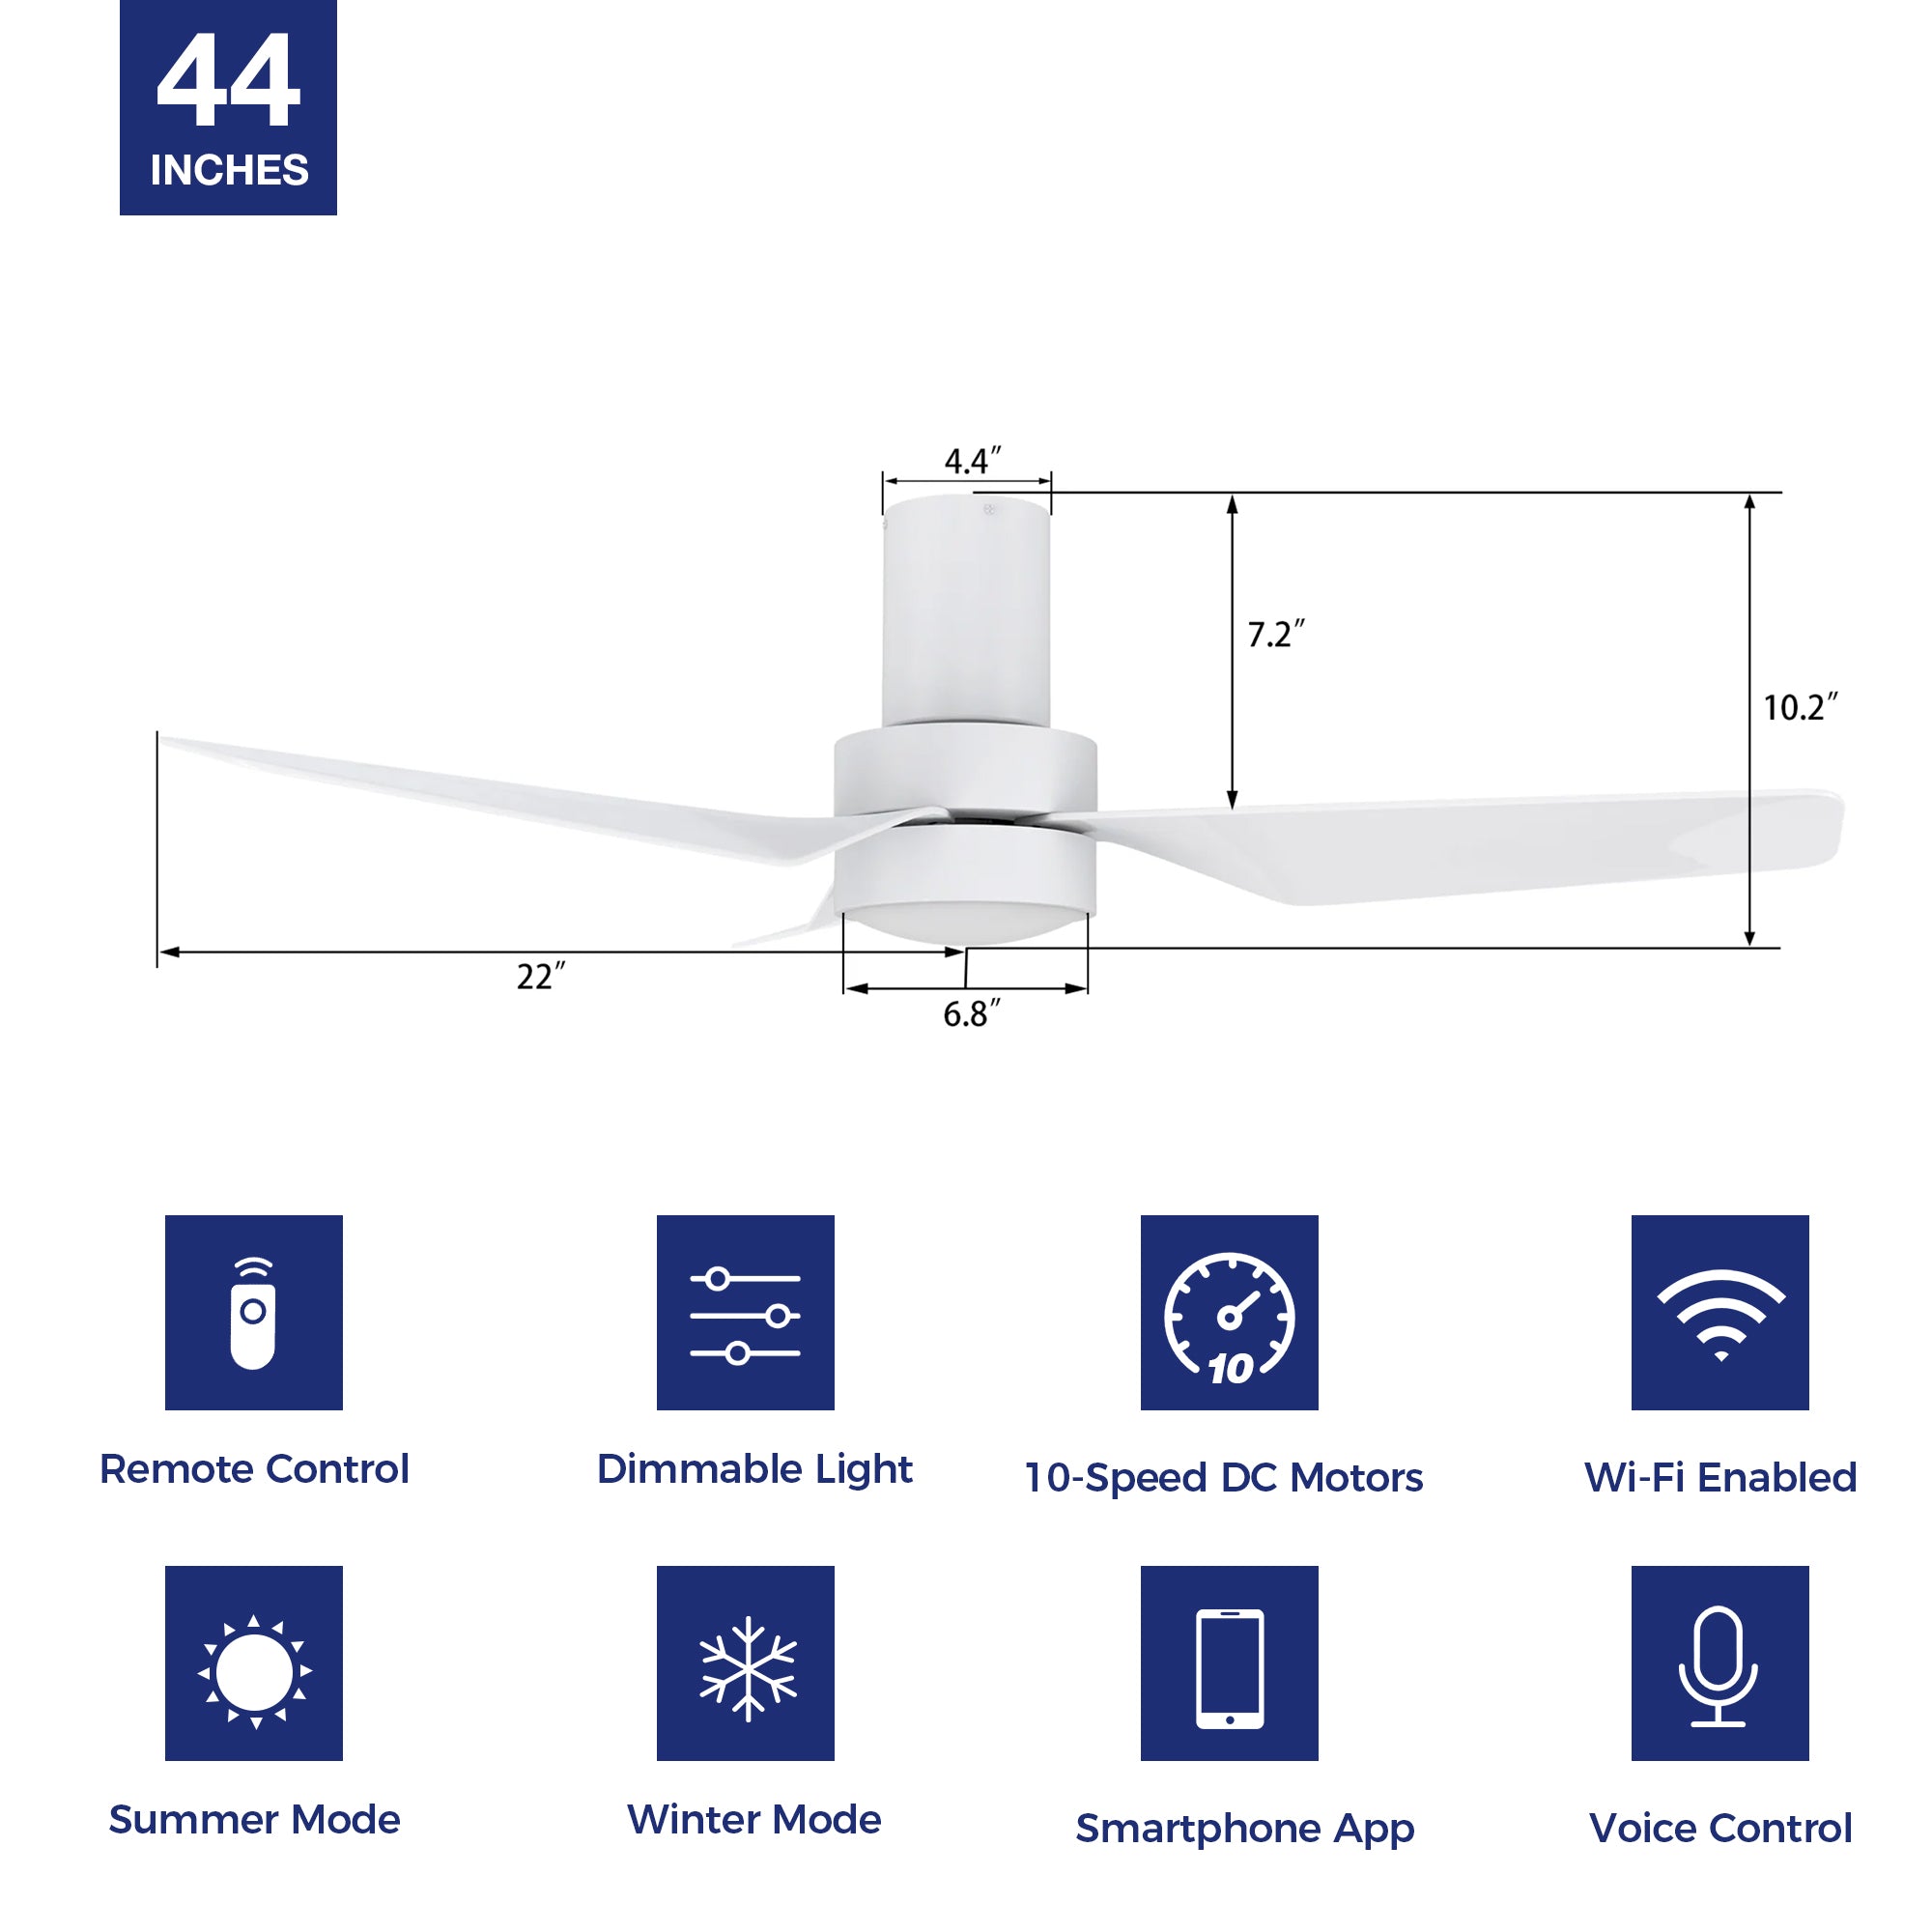 This Barnet 44&#39;&#39; smart ceiling fan keeps your space cool, bright, and stylish. It is a soft modern masterpiece perfect for your indoor living spaces. This Wifi smart ceiling fan is a simplicity designing with White finish, use very strong ABS blades and has an integrated 4000K LED cool light. The fan features Remote control, Wi-Fi apps, Siri Shortcut and Voice control technology (compatible with Amazon Alexa and Google Home Assistant ) to set fan preferences. 